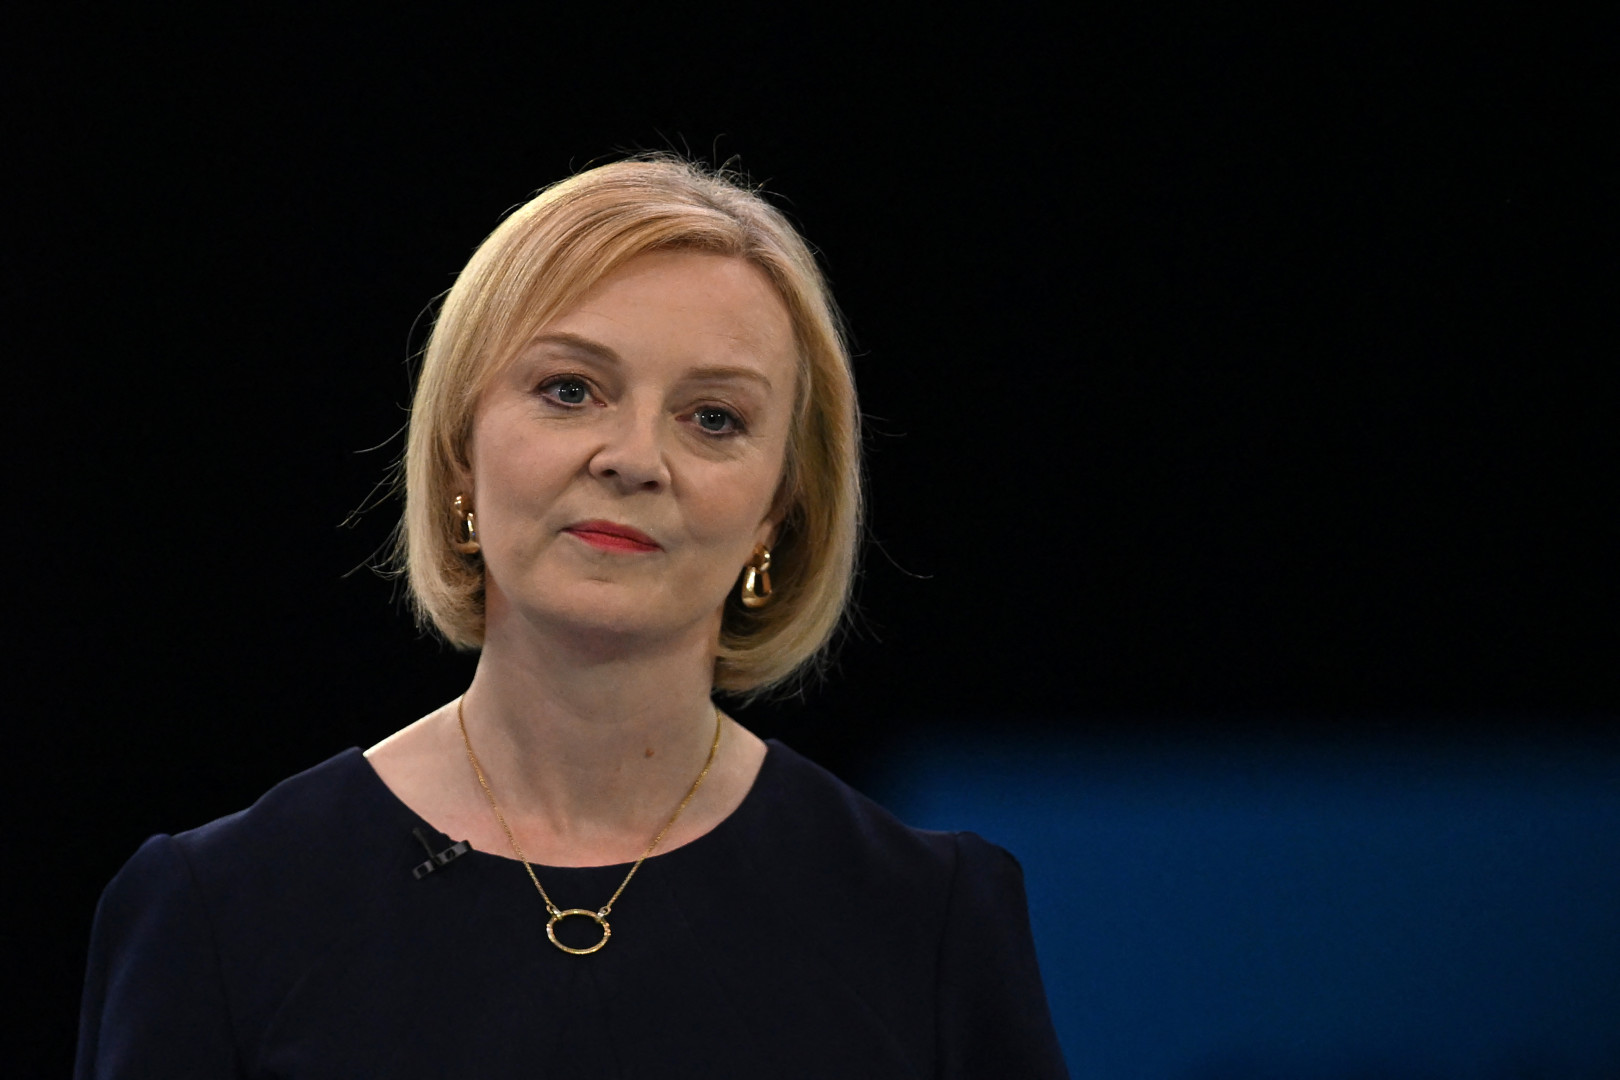 British Prime Minister Liz Truss resigns after six weeks in office